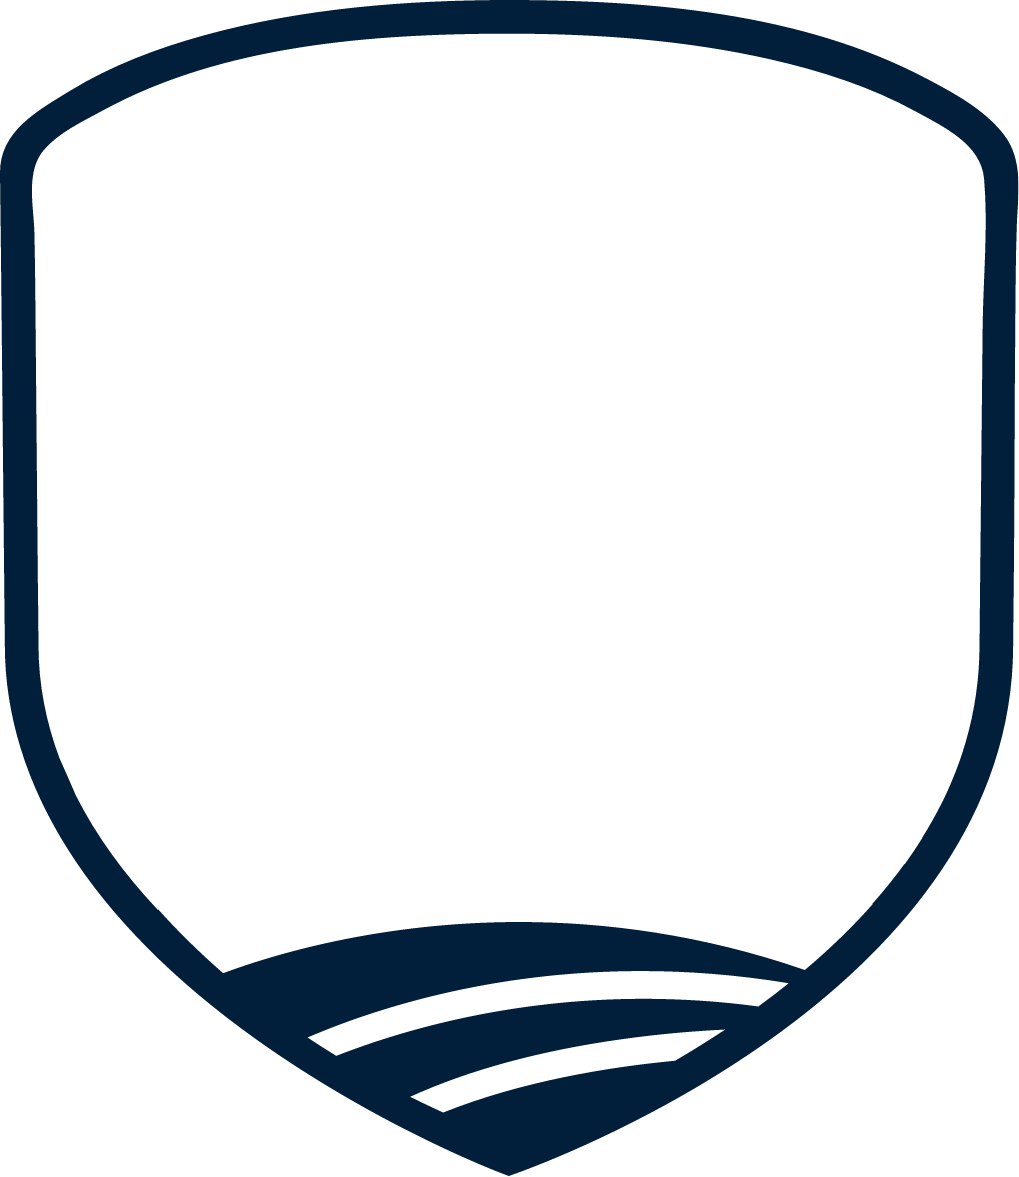 Better by Choice